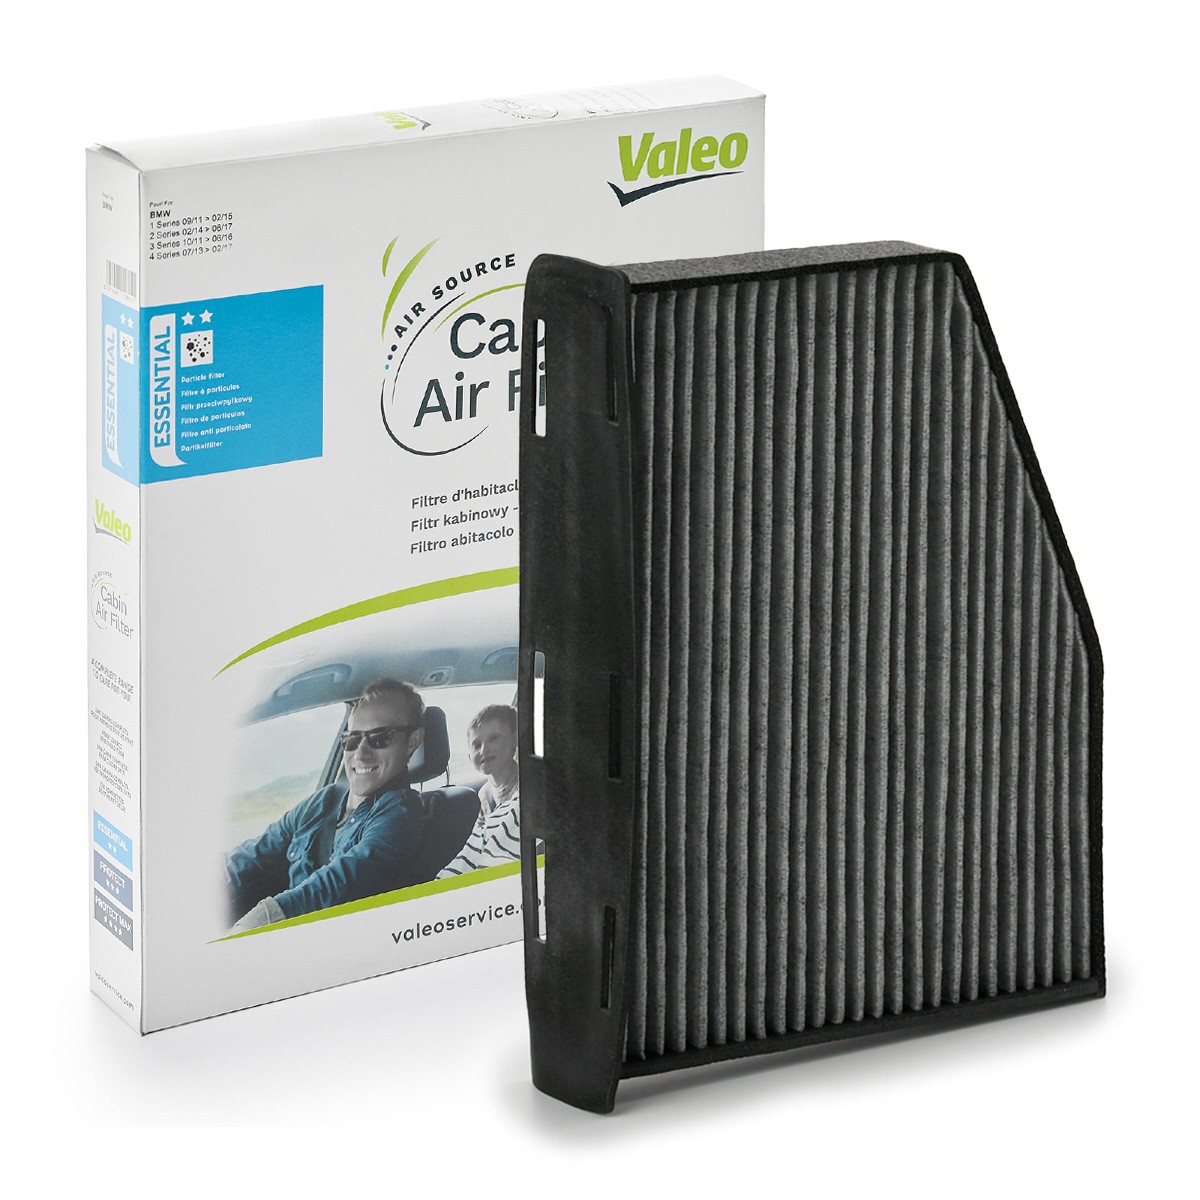 VALEO 698801 Air conditioner filter Activated Carbon Filter, 279 mm x 216 mm x 57 mm